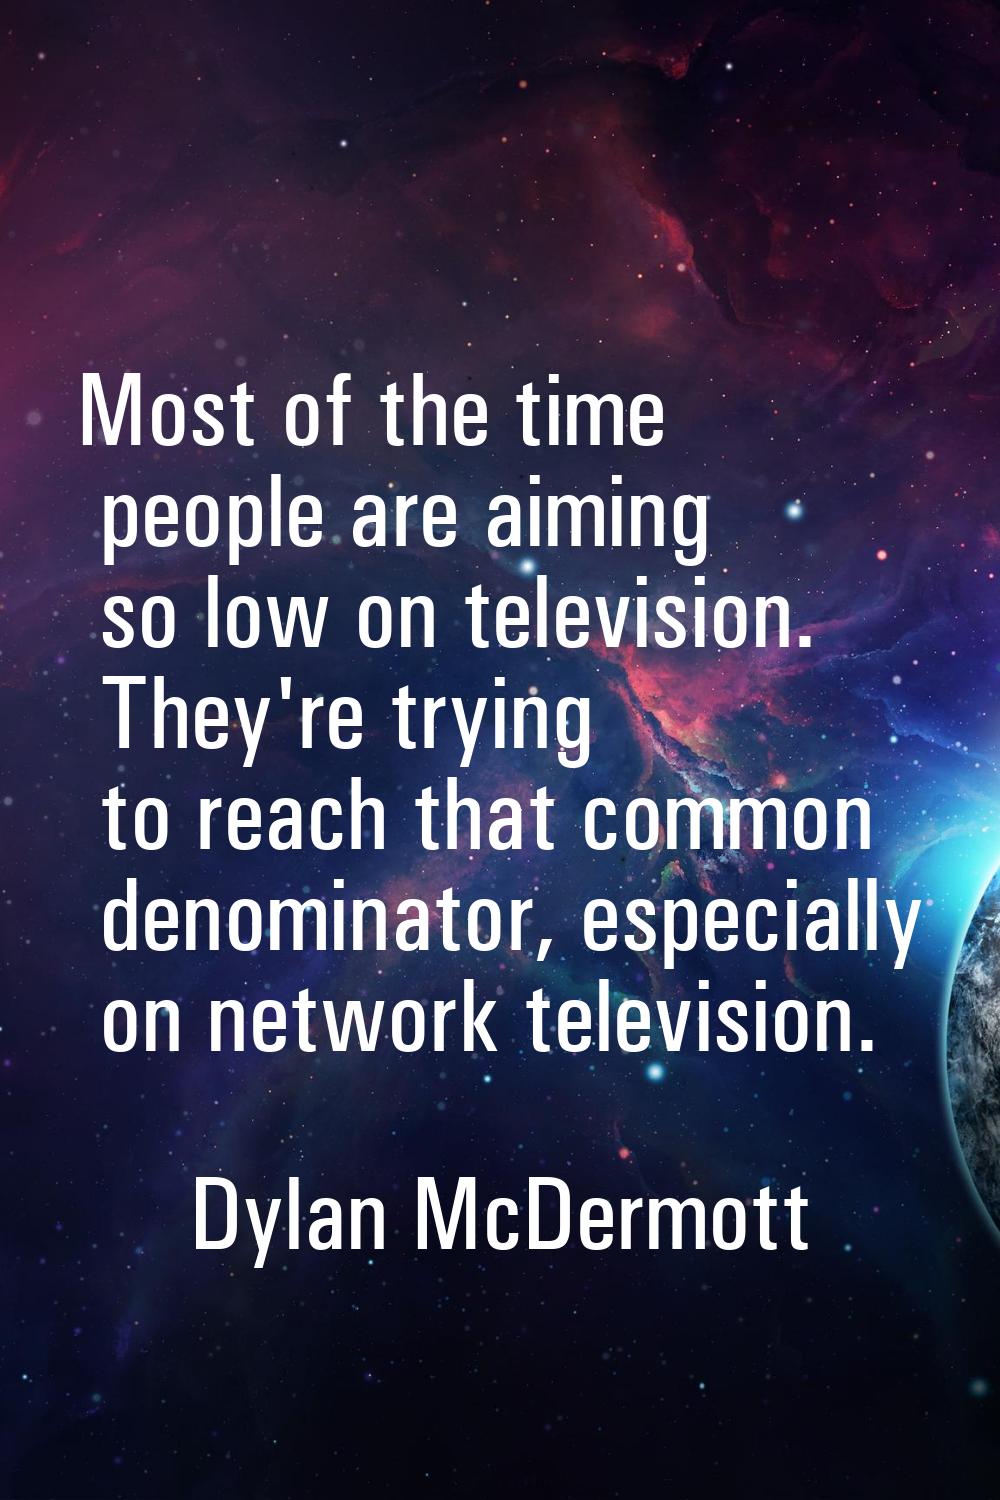 Most of the time people are aiming so low on television. They're trying to reach that common denomi